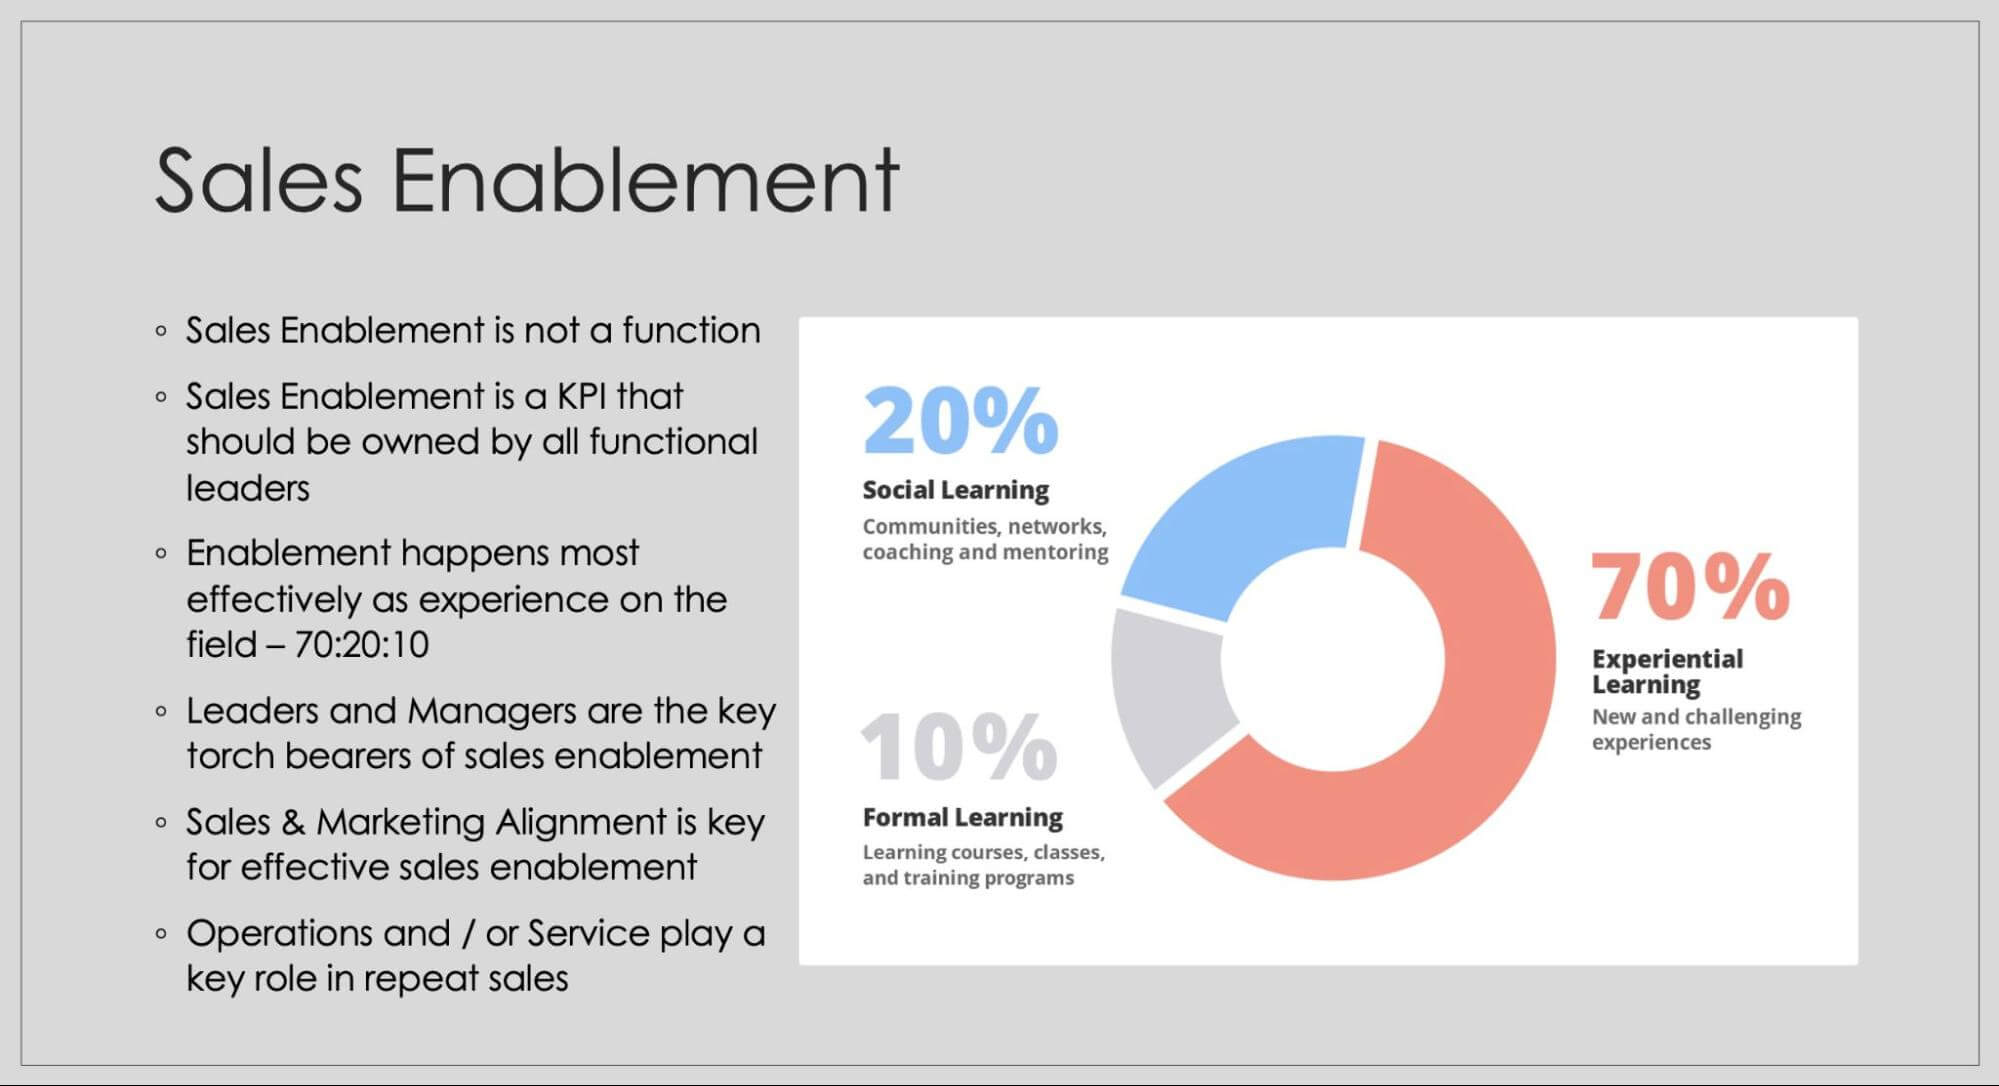 Sales enablement: 70% experiential learning, 20% social learning, 10% formal learning